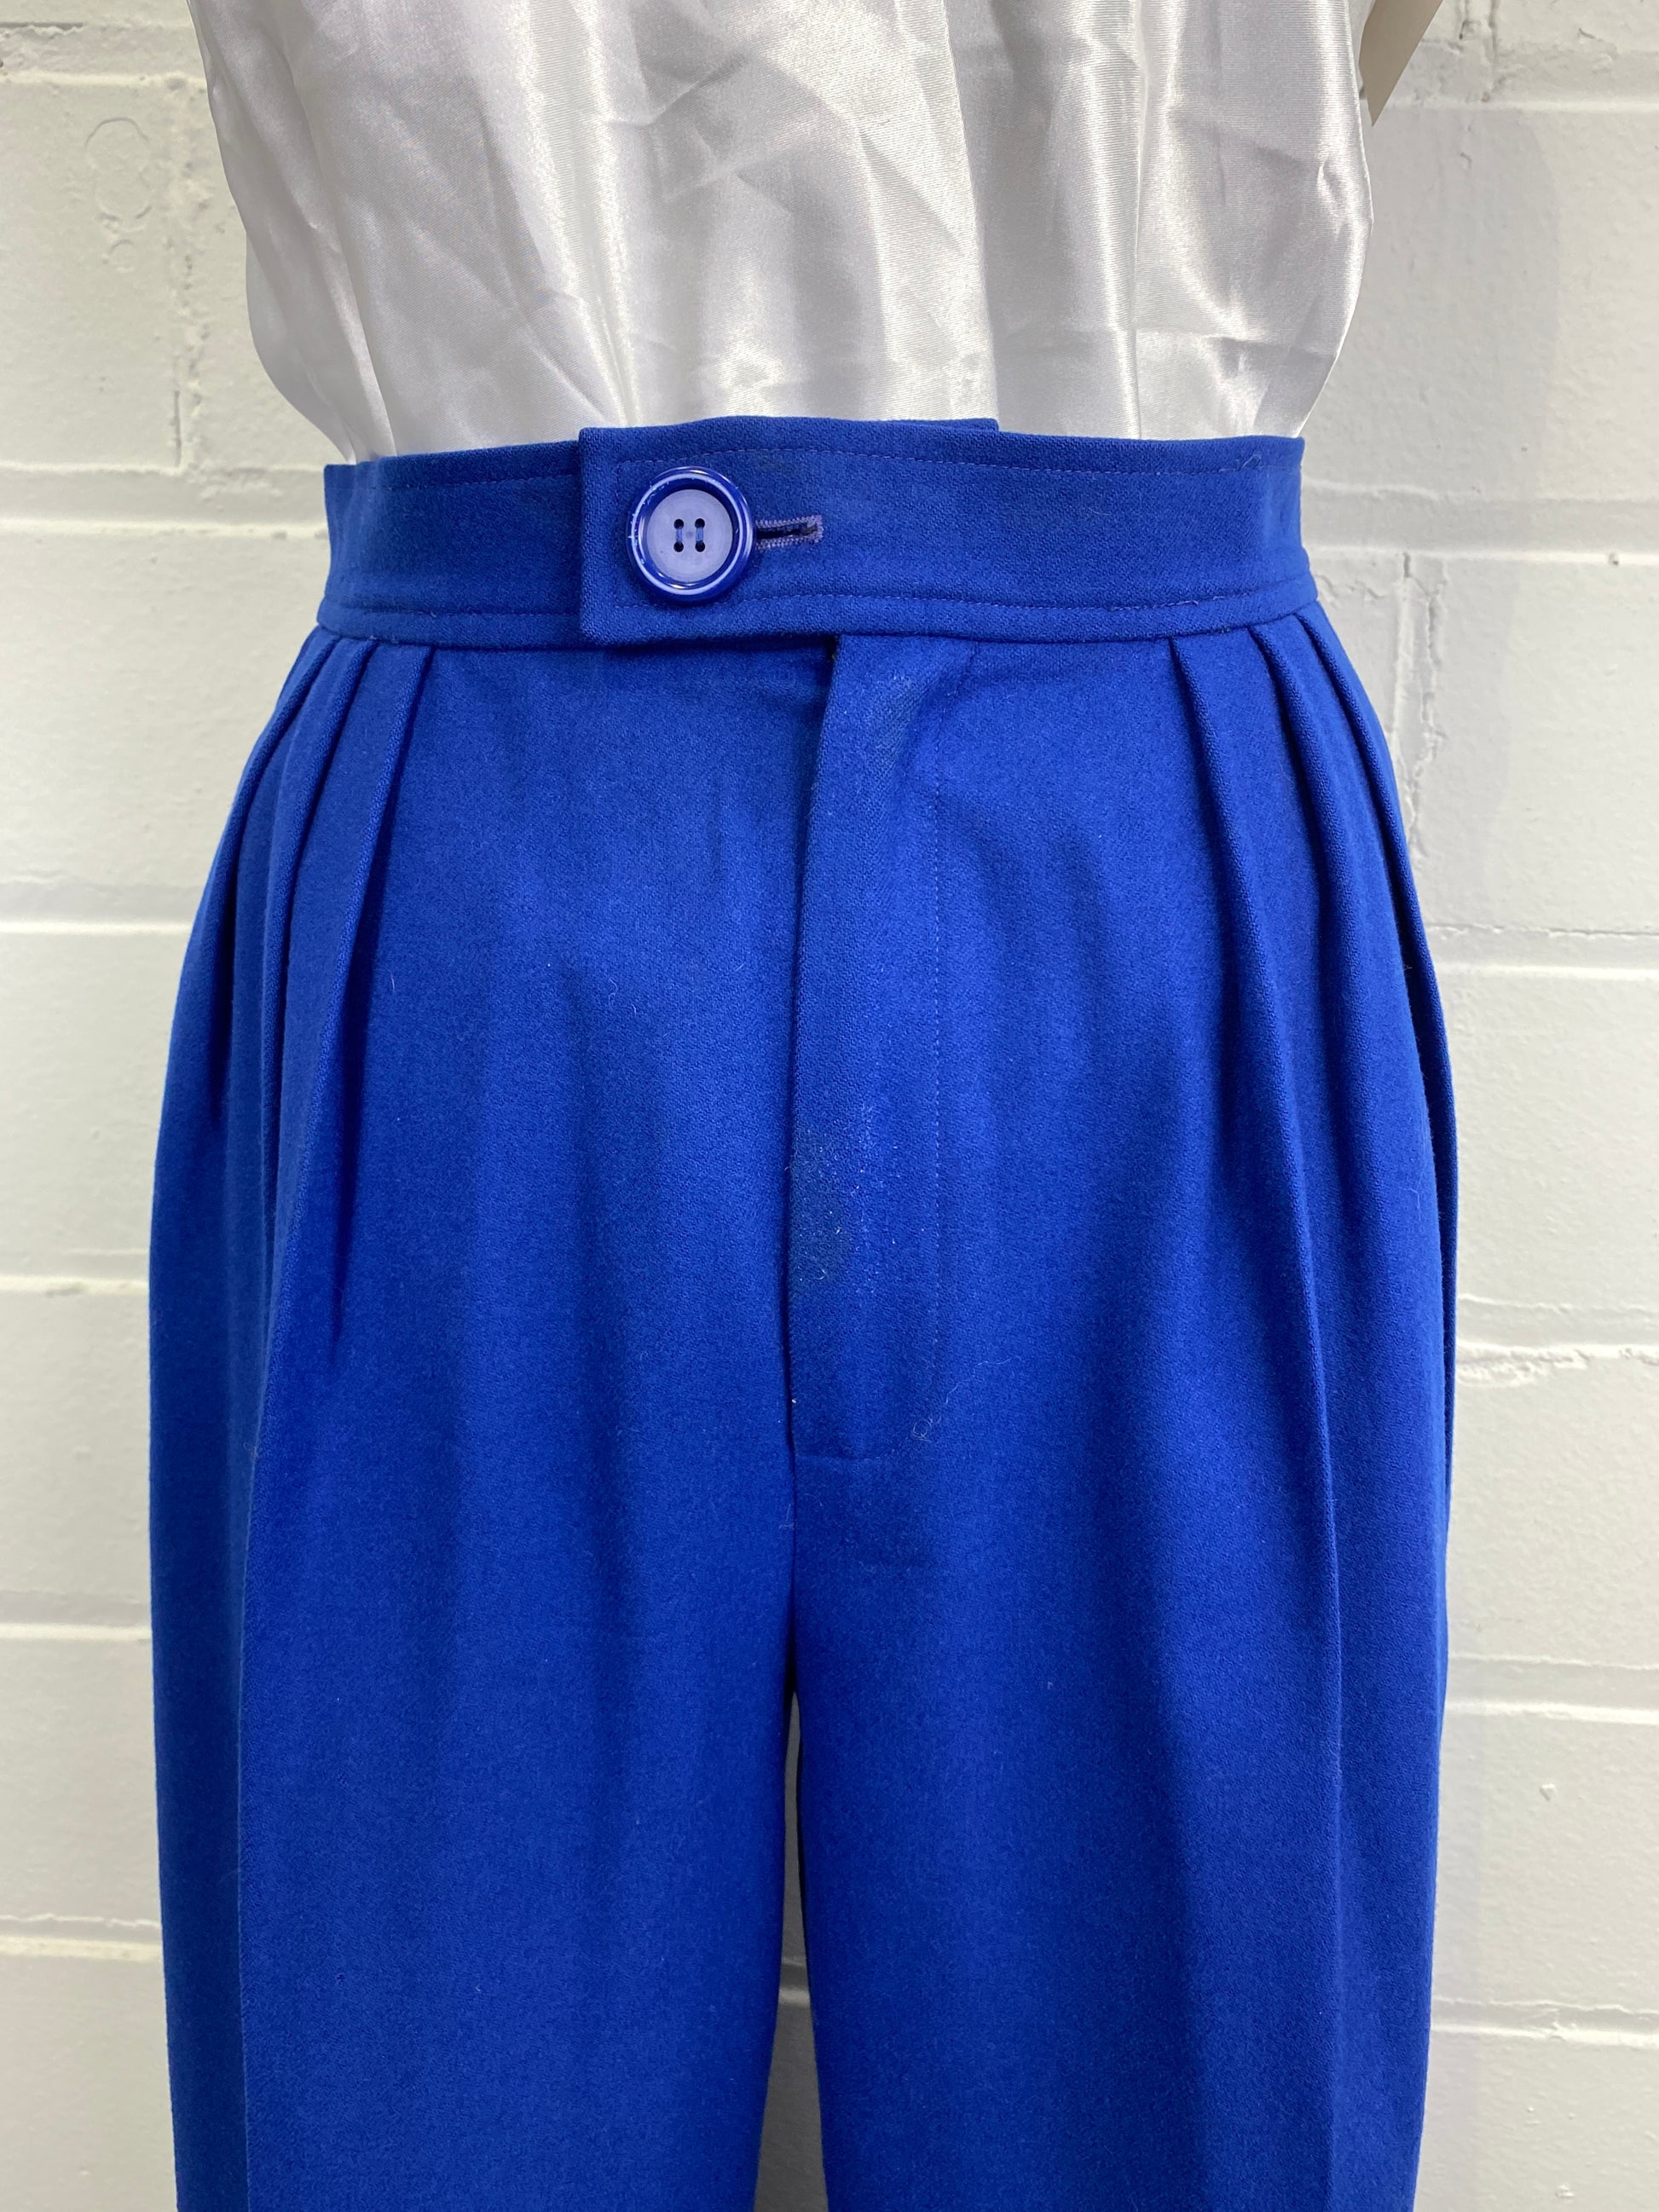 80s Bright Blue Trousers Vintage Royal Blue High Waisted Pants